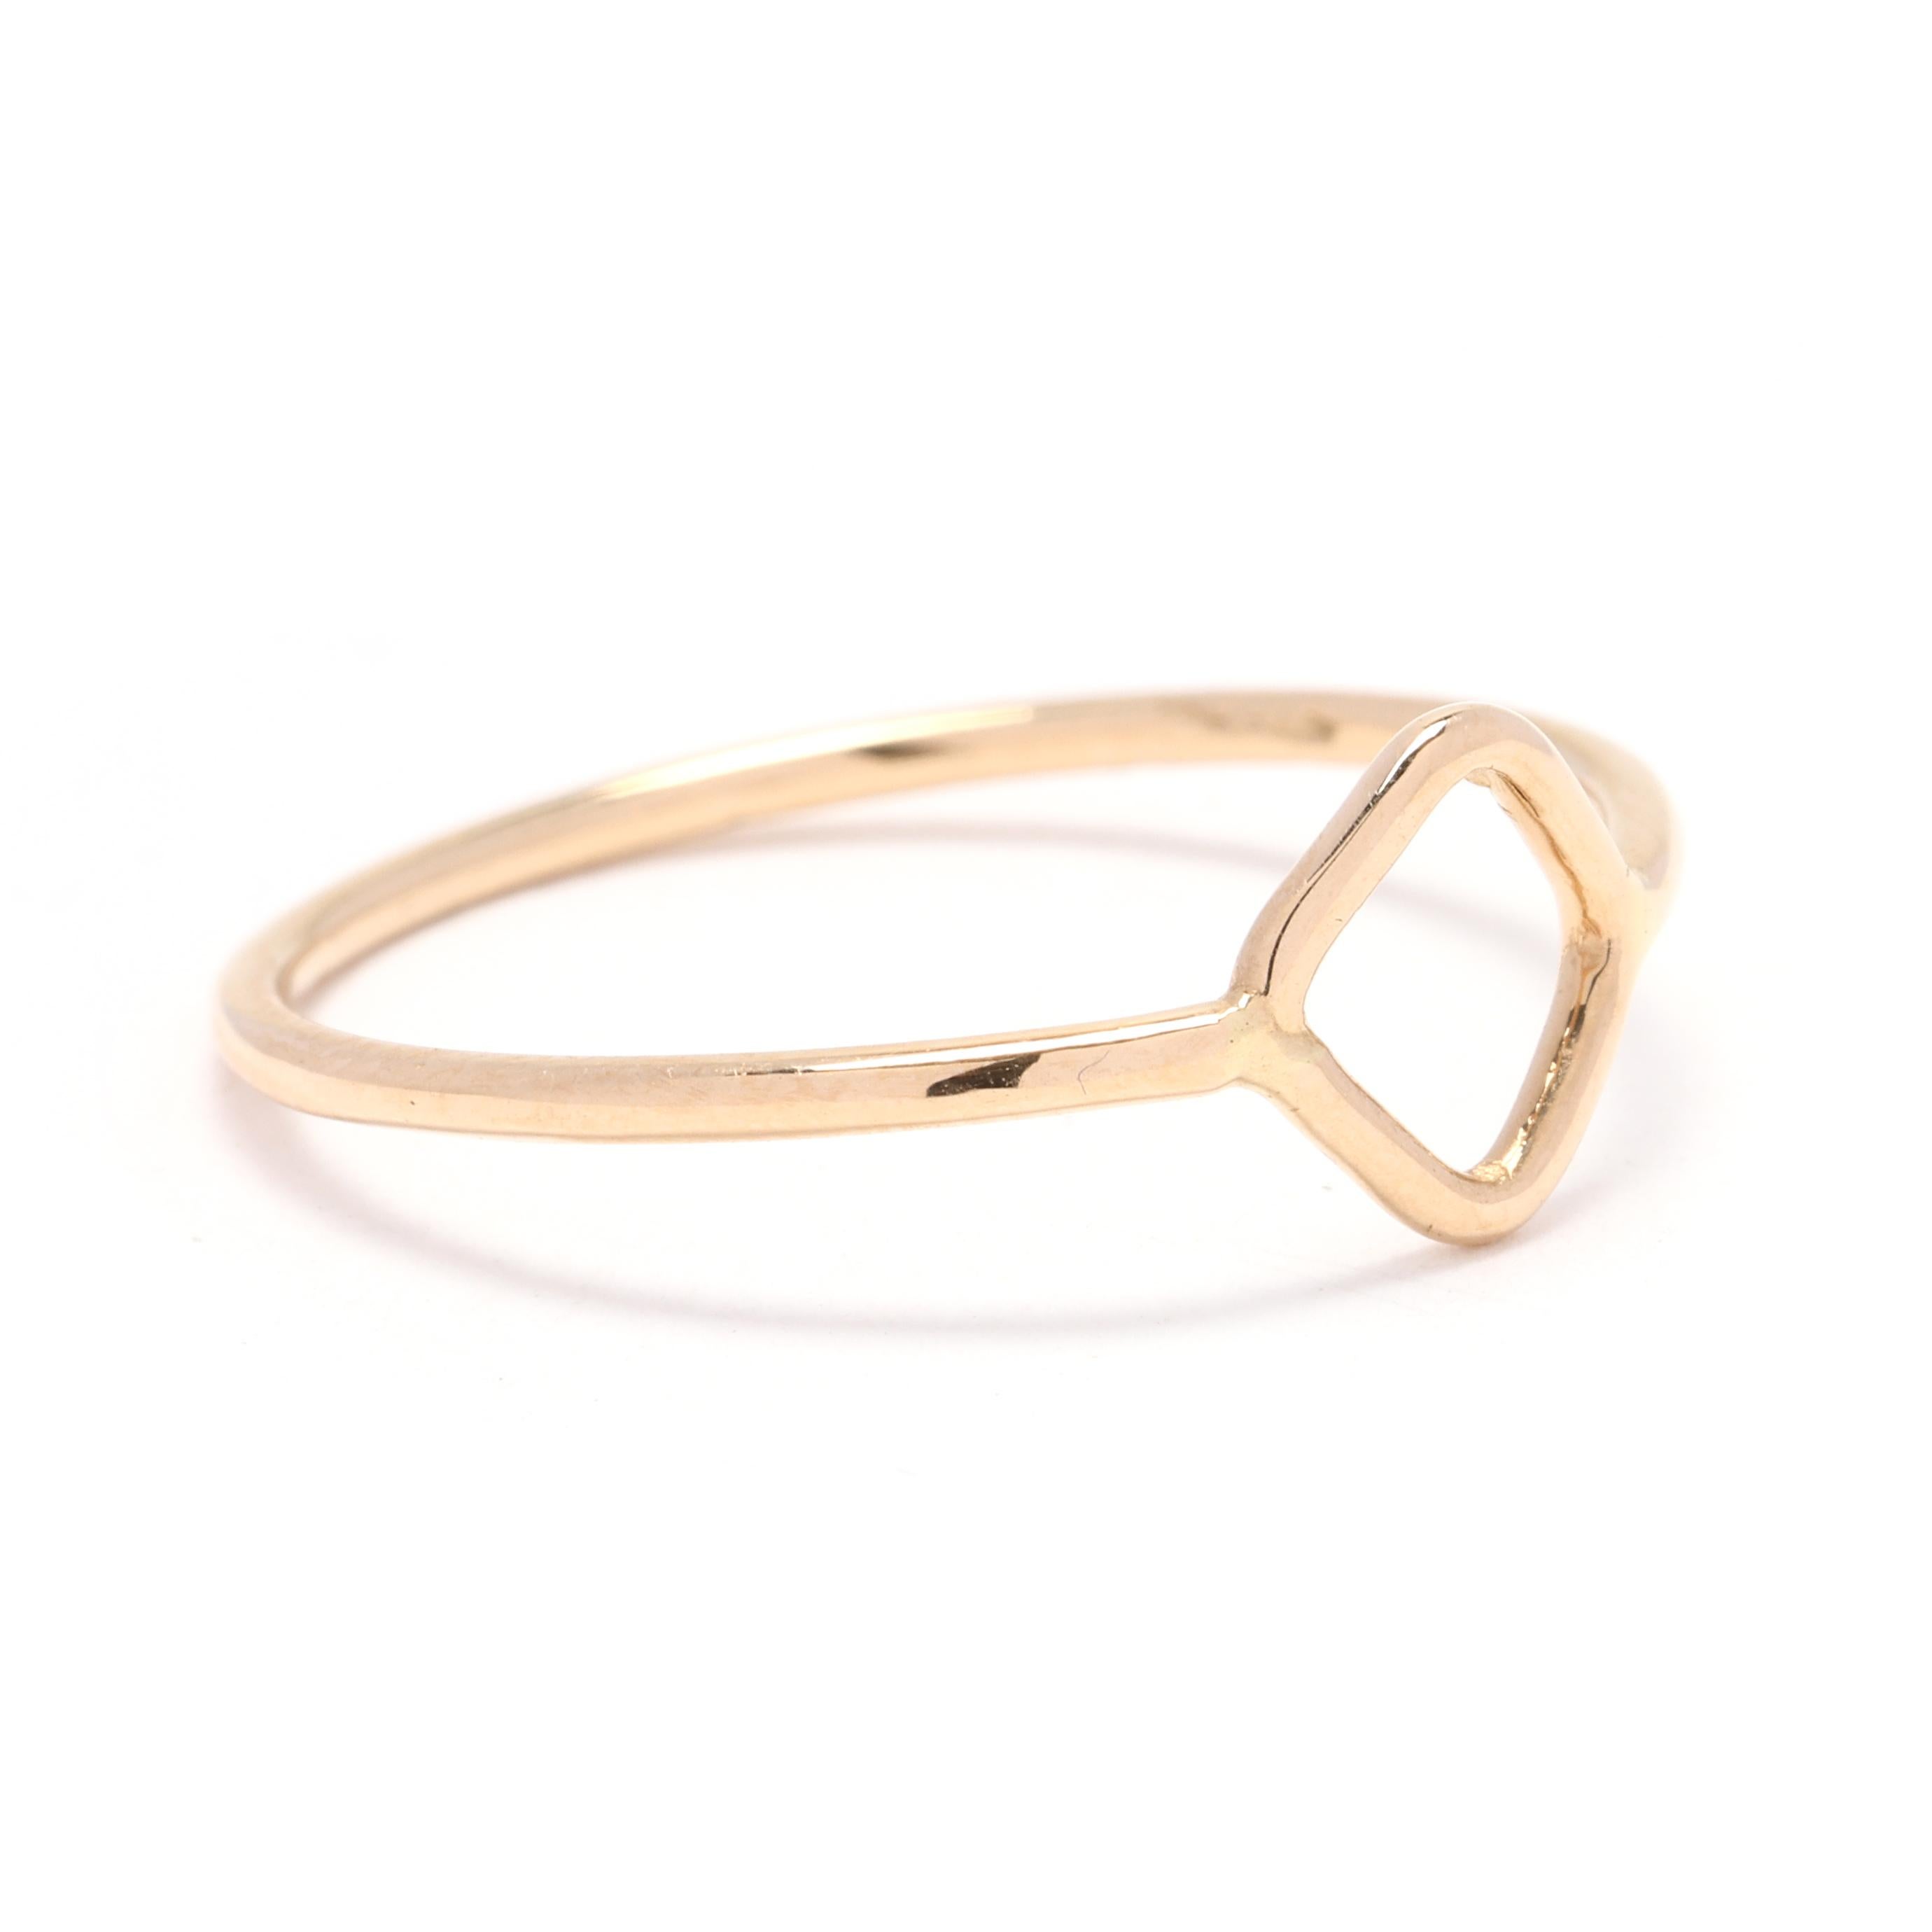 This dainty 14k yellow gold open square ring is the perfect everyday accessory. Made with solid 14k yellow gold, this ring is both durable and high-quality. The open square design adds a modern and minimalist touch, making it versatile and easy to